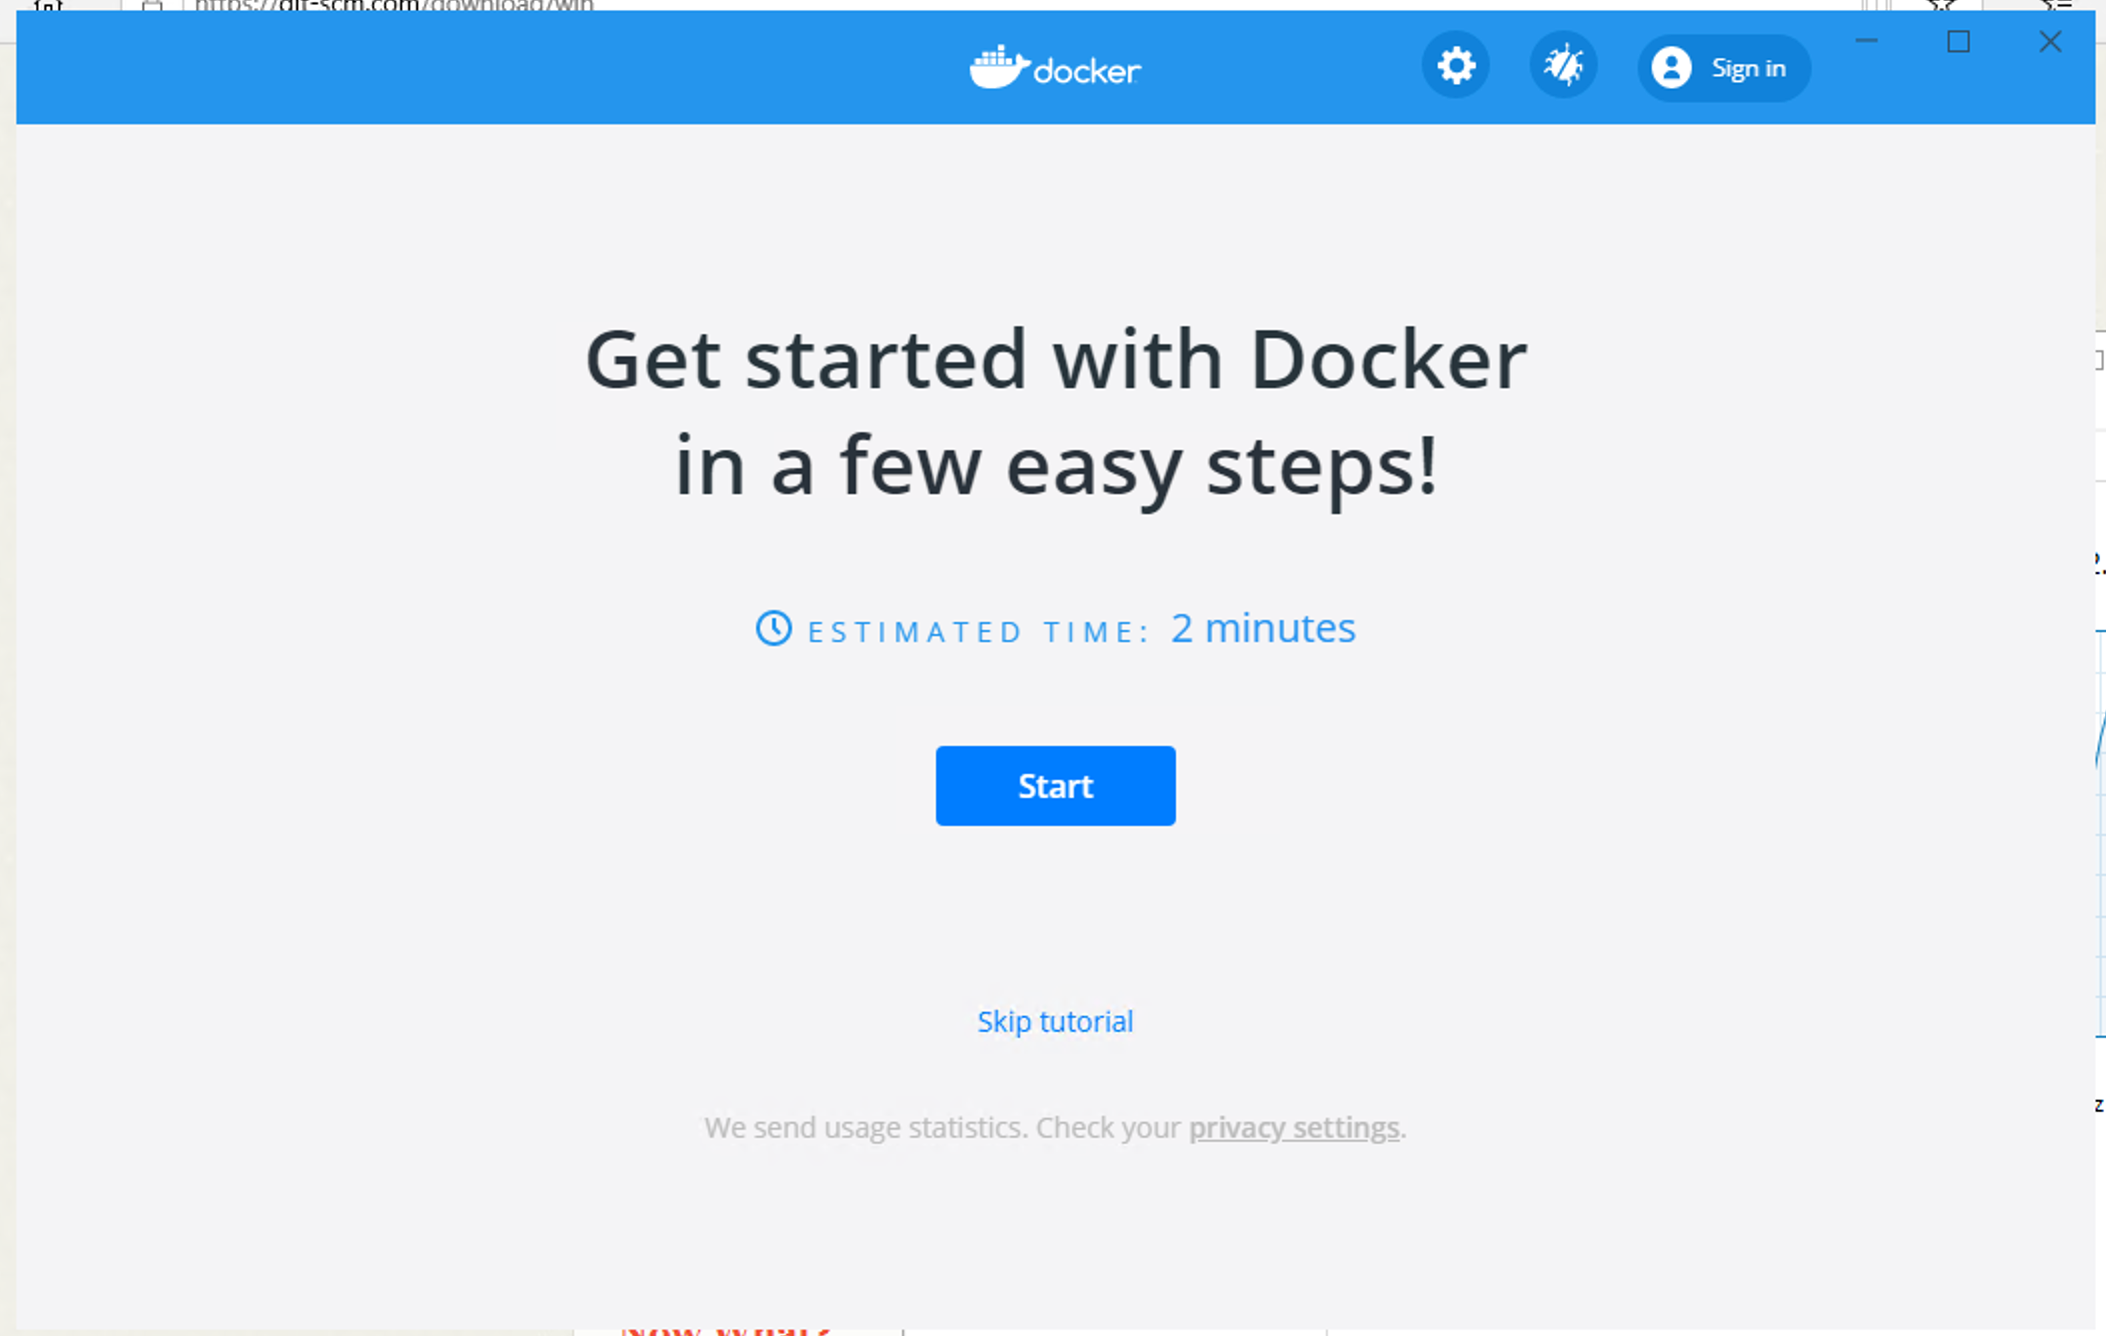 Docker is launched